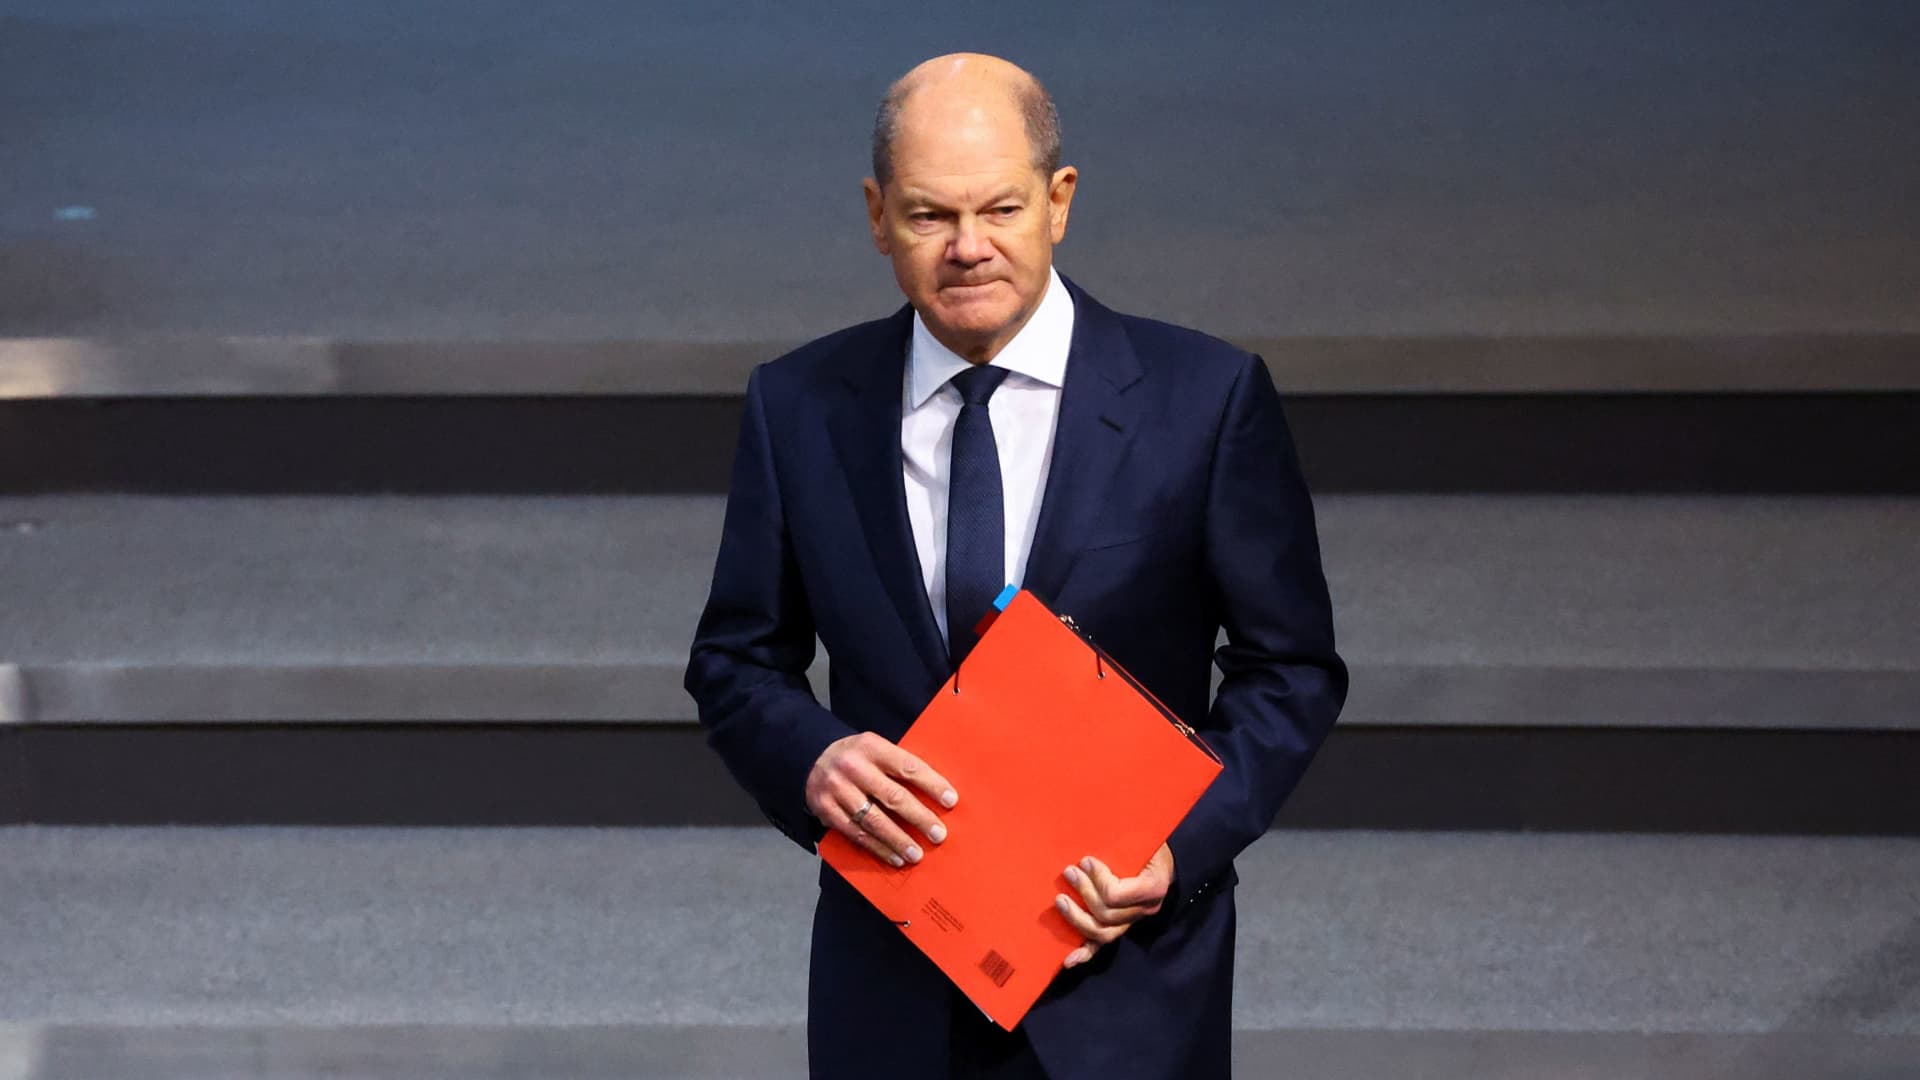 German Chancellor Olaf Scholz attends a session of the lower house of parliament Bundestag in Berlin, Germany January 25, 2023. 